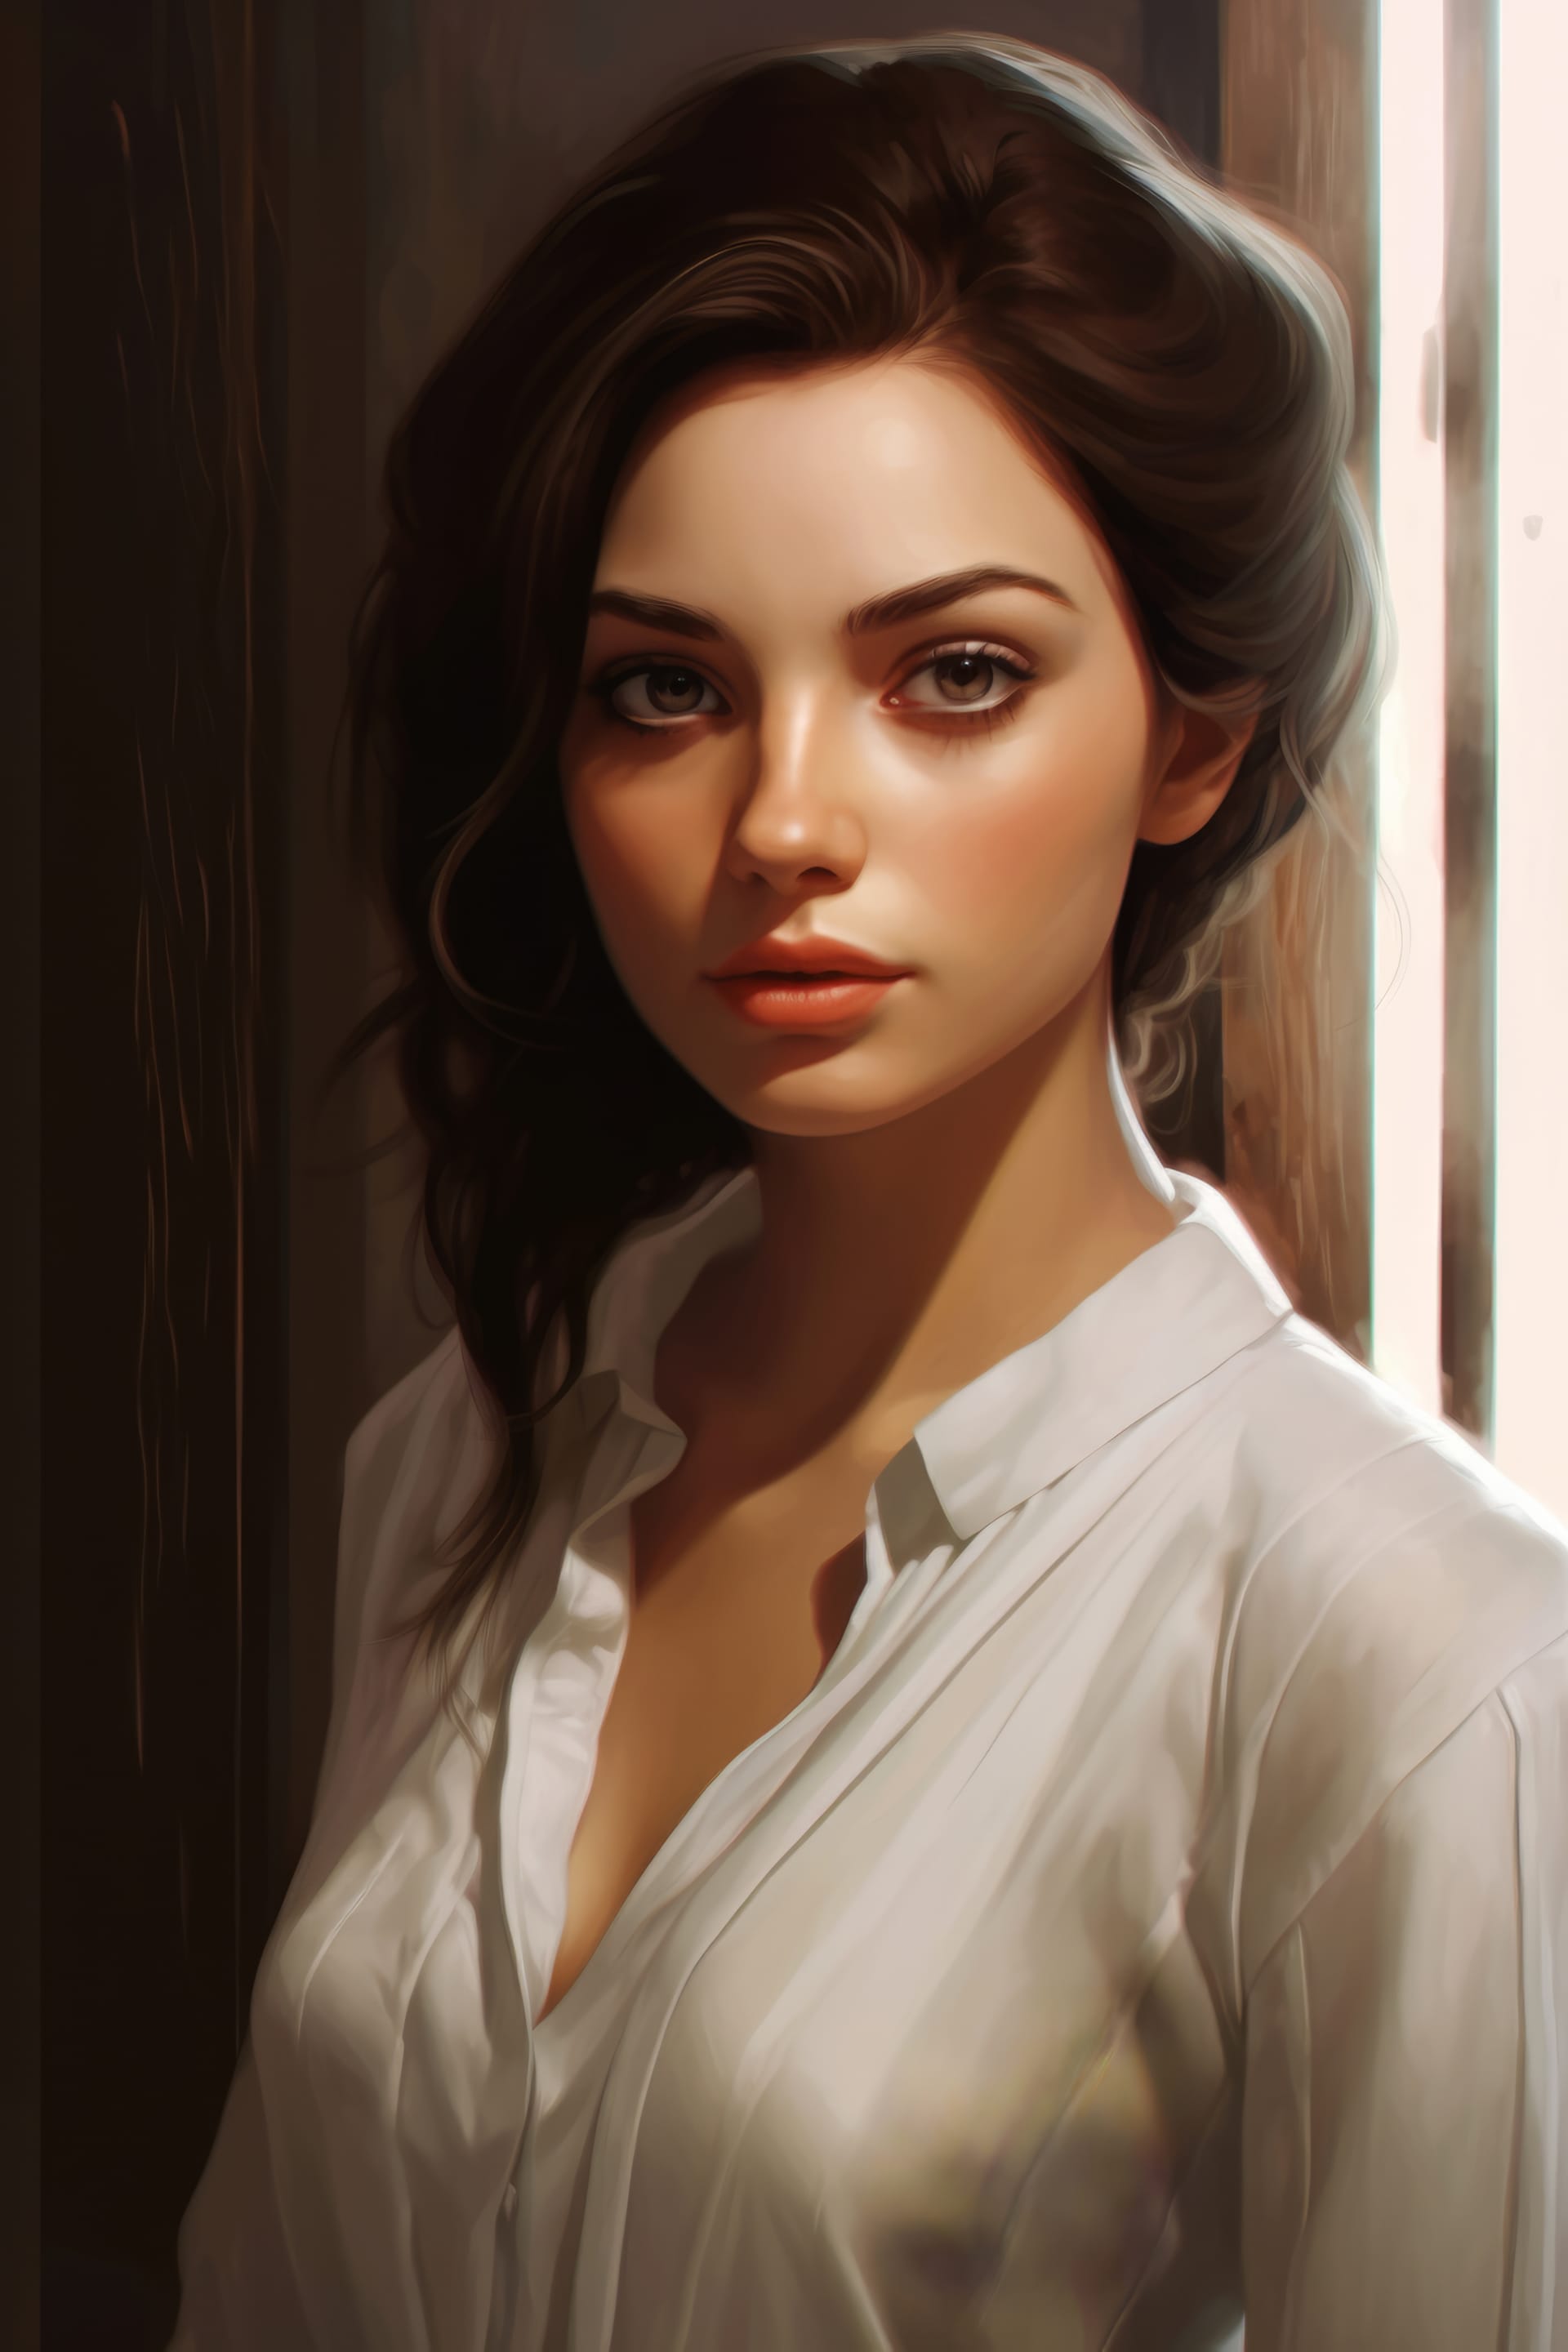 Excellent artwork woman with brown hair white dress